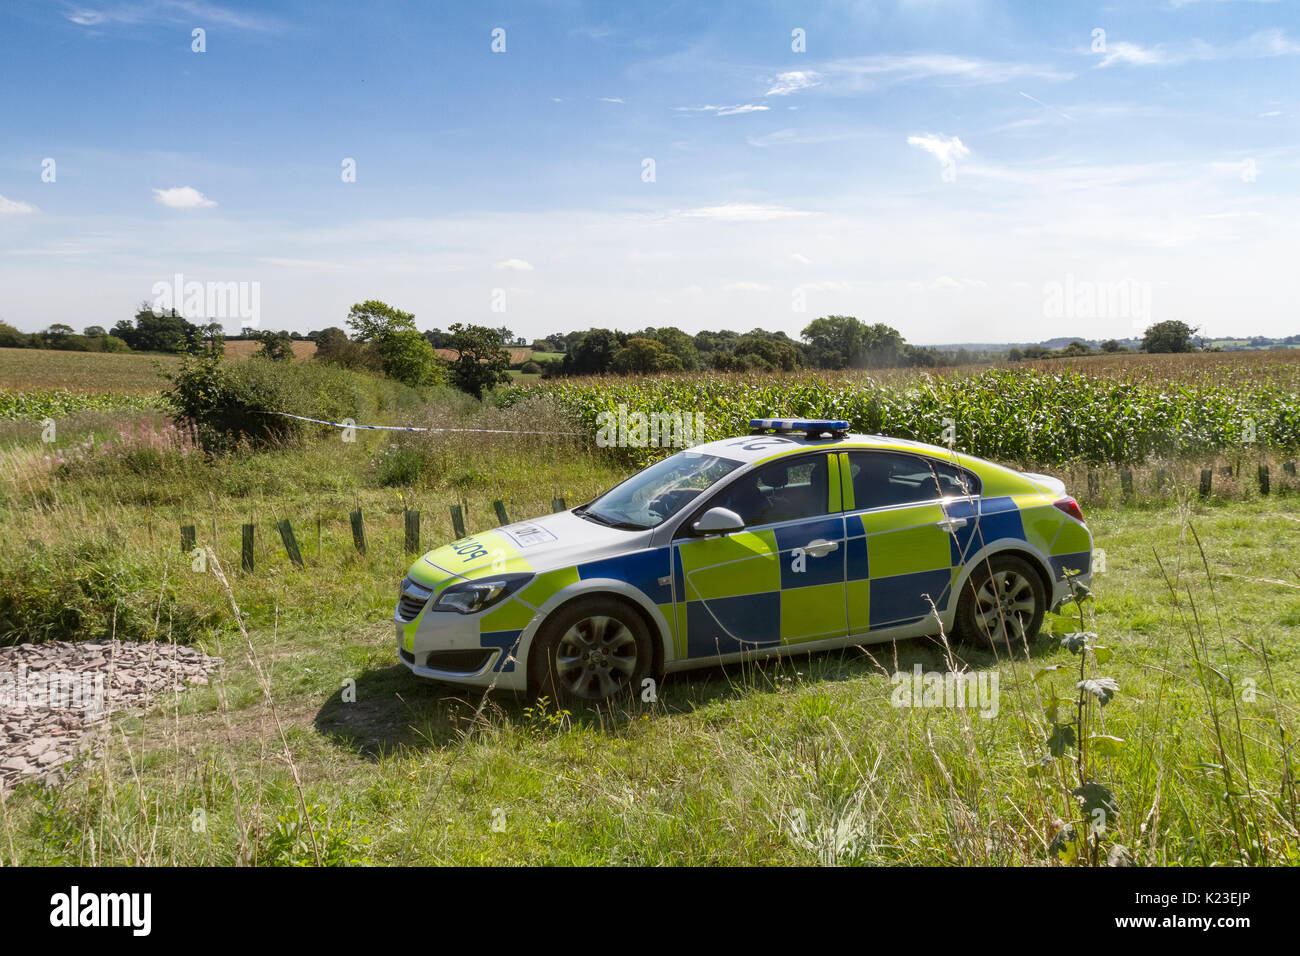 Blithfield Reservoir, Staffordshire, UK. 28th Aug, 2017. Police cars guard the aftermath of a light aircraft plane crash in the small village of Abbots Bromley. An aircraft with one person on board crashed into a corn field and the causalty was air-lifted to Royal Stoke hospital for treatment. Blithfield Reservoir, Abbots Bromley, Staffordshire, UK. 28th August 2017. Credit: Richard Holmes/Alamy Live News Stock Photo